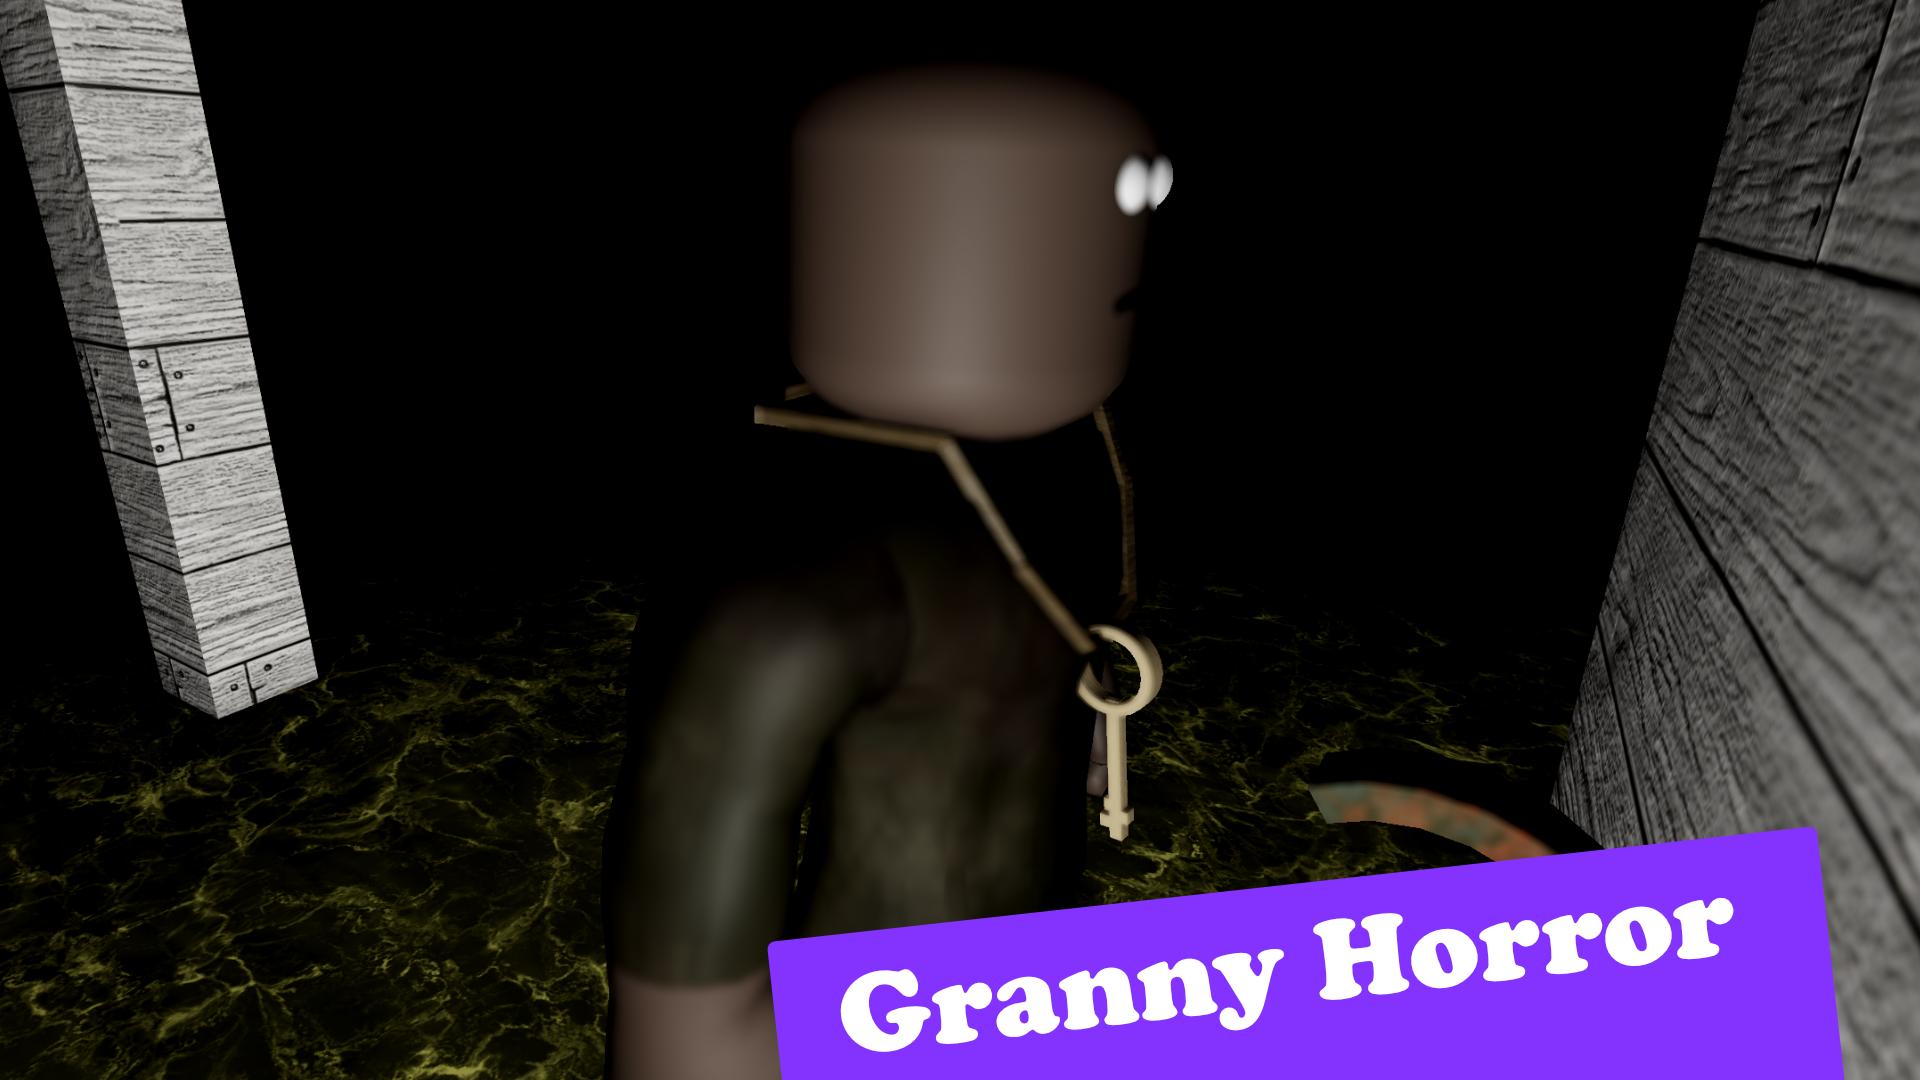 Download & Play Granny: Chapter Two on PC 